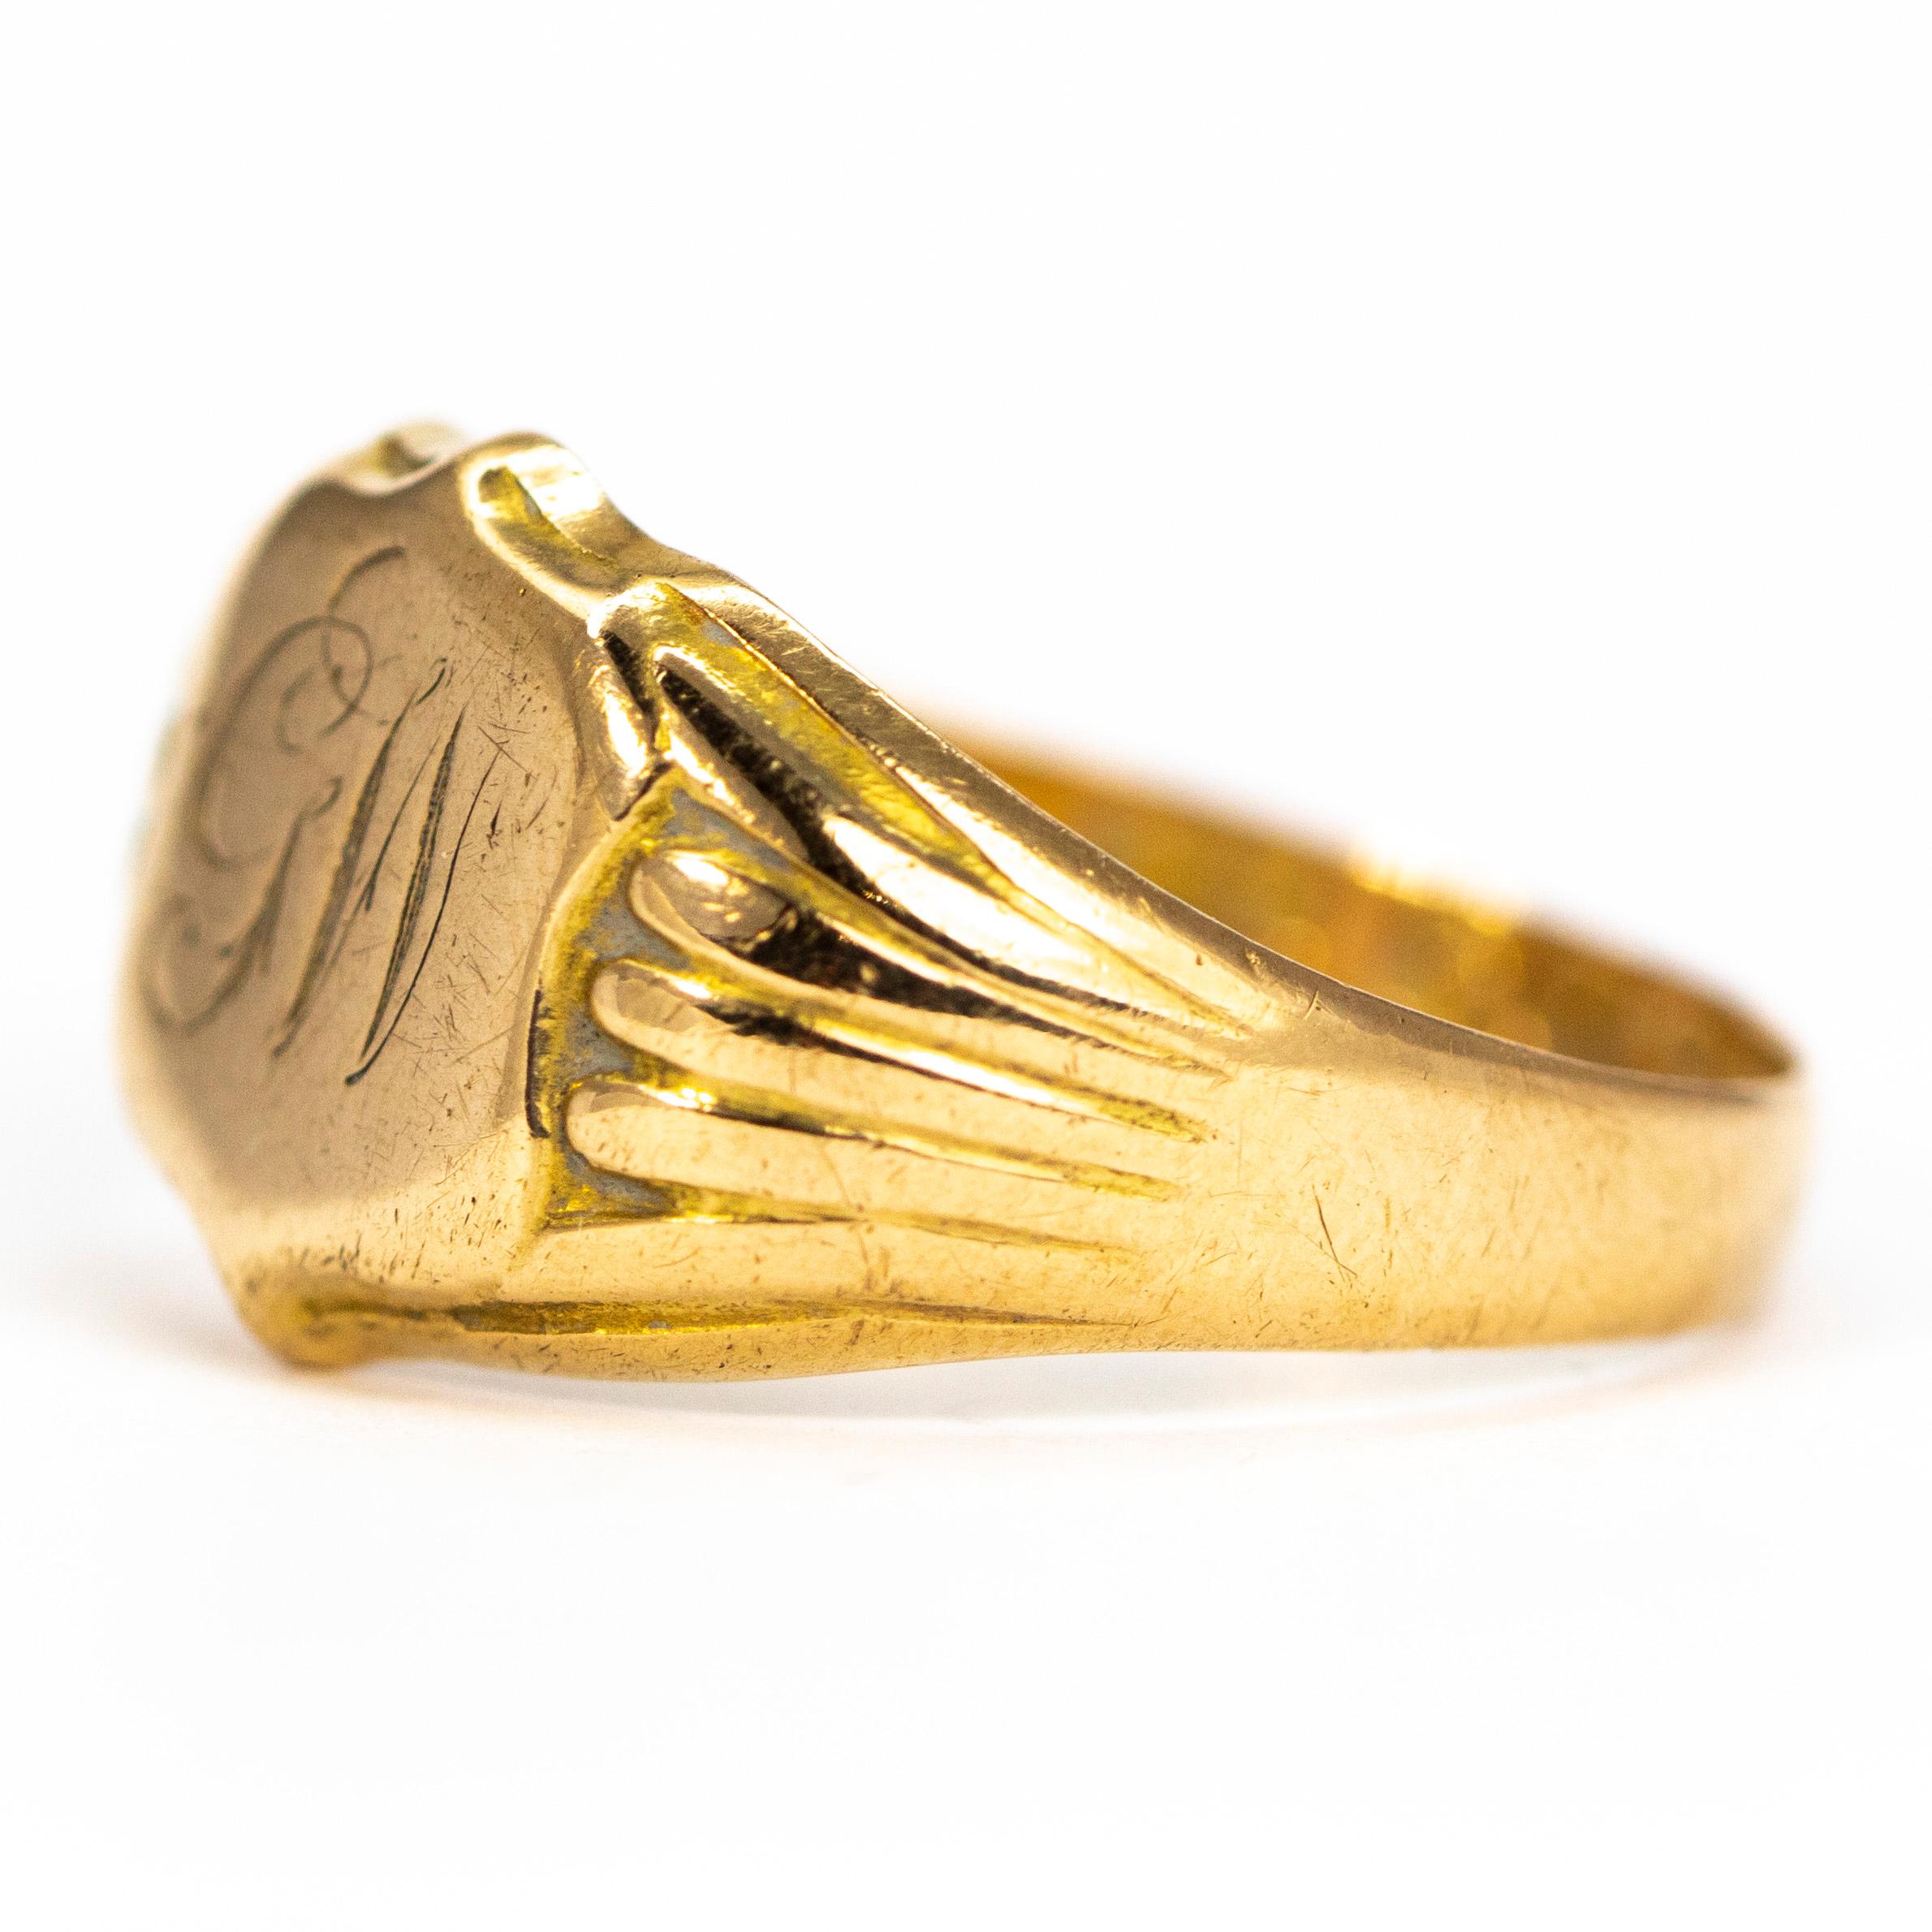 The fluid scroll font which reads 'GW' is finely engraved onto the main shield panel of this ring. The chunky shoulders have ribbed detail and carry on down into a plain band modelled in 18ct gold. Made in Birmingham, England.

RIng Size: R 1/2 or 8